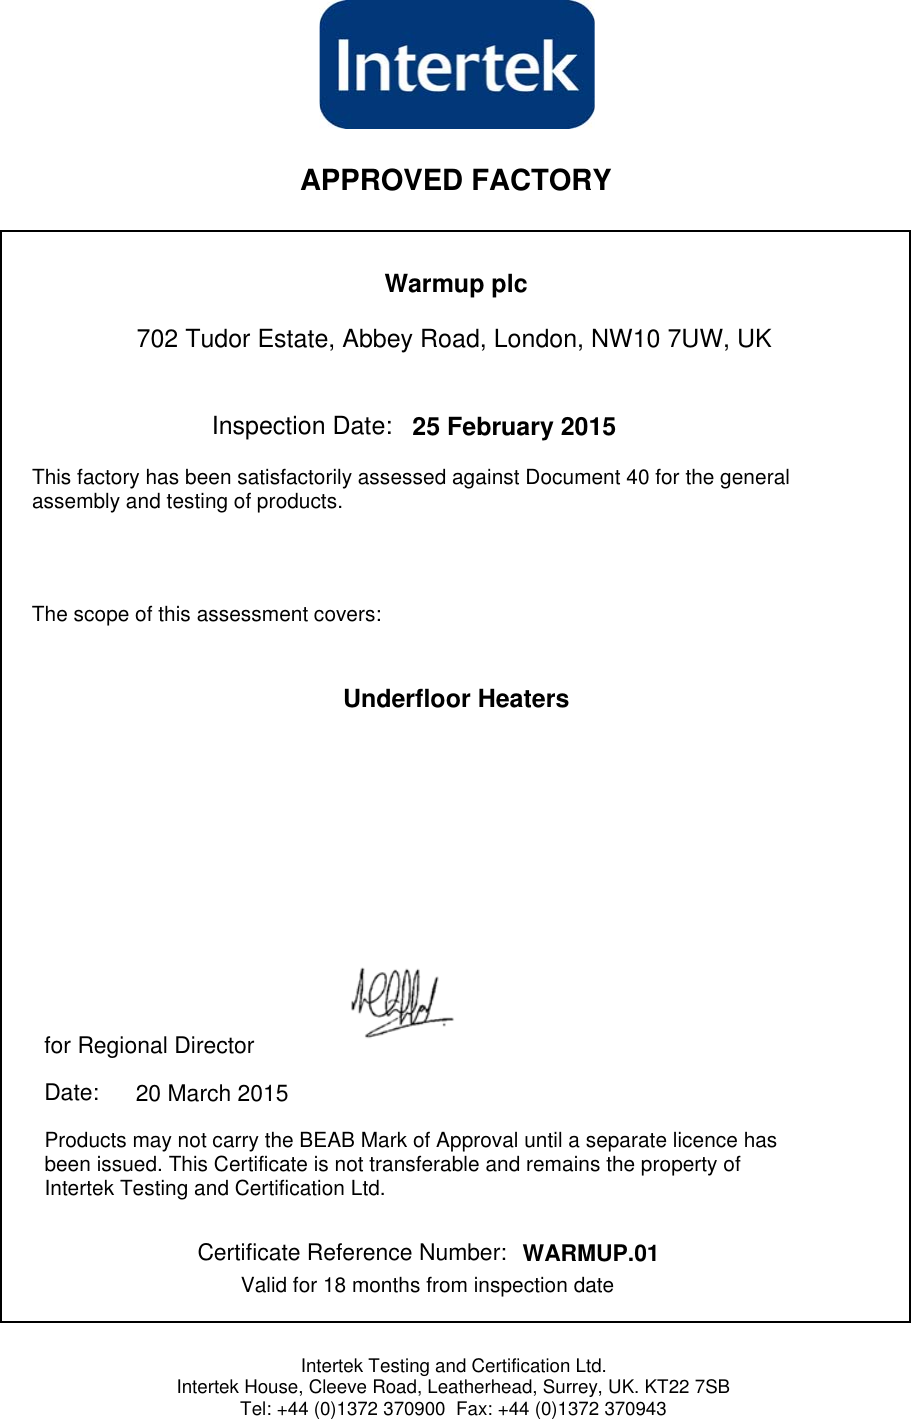 Page 1 of 1 - UK Factory Certificate Signed - Report Accreditation-2015-UK-Factory-Certificate-Signed-Report